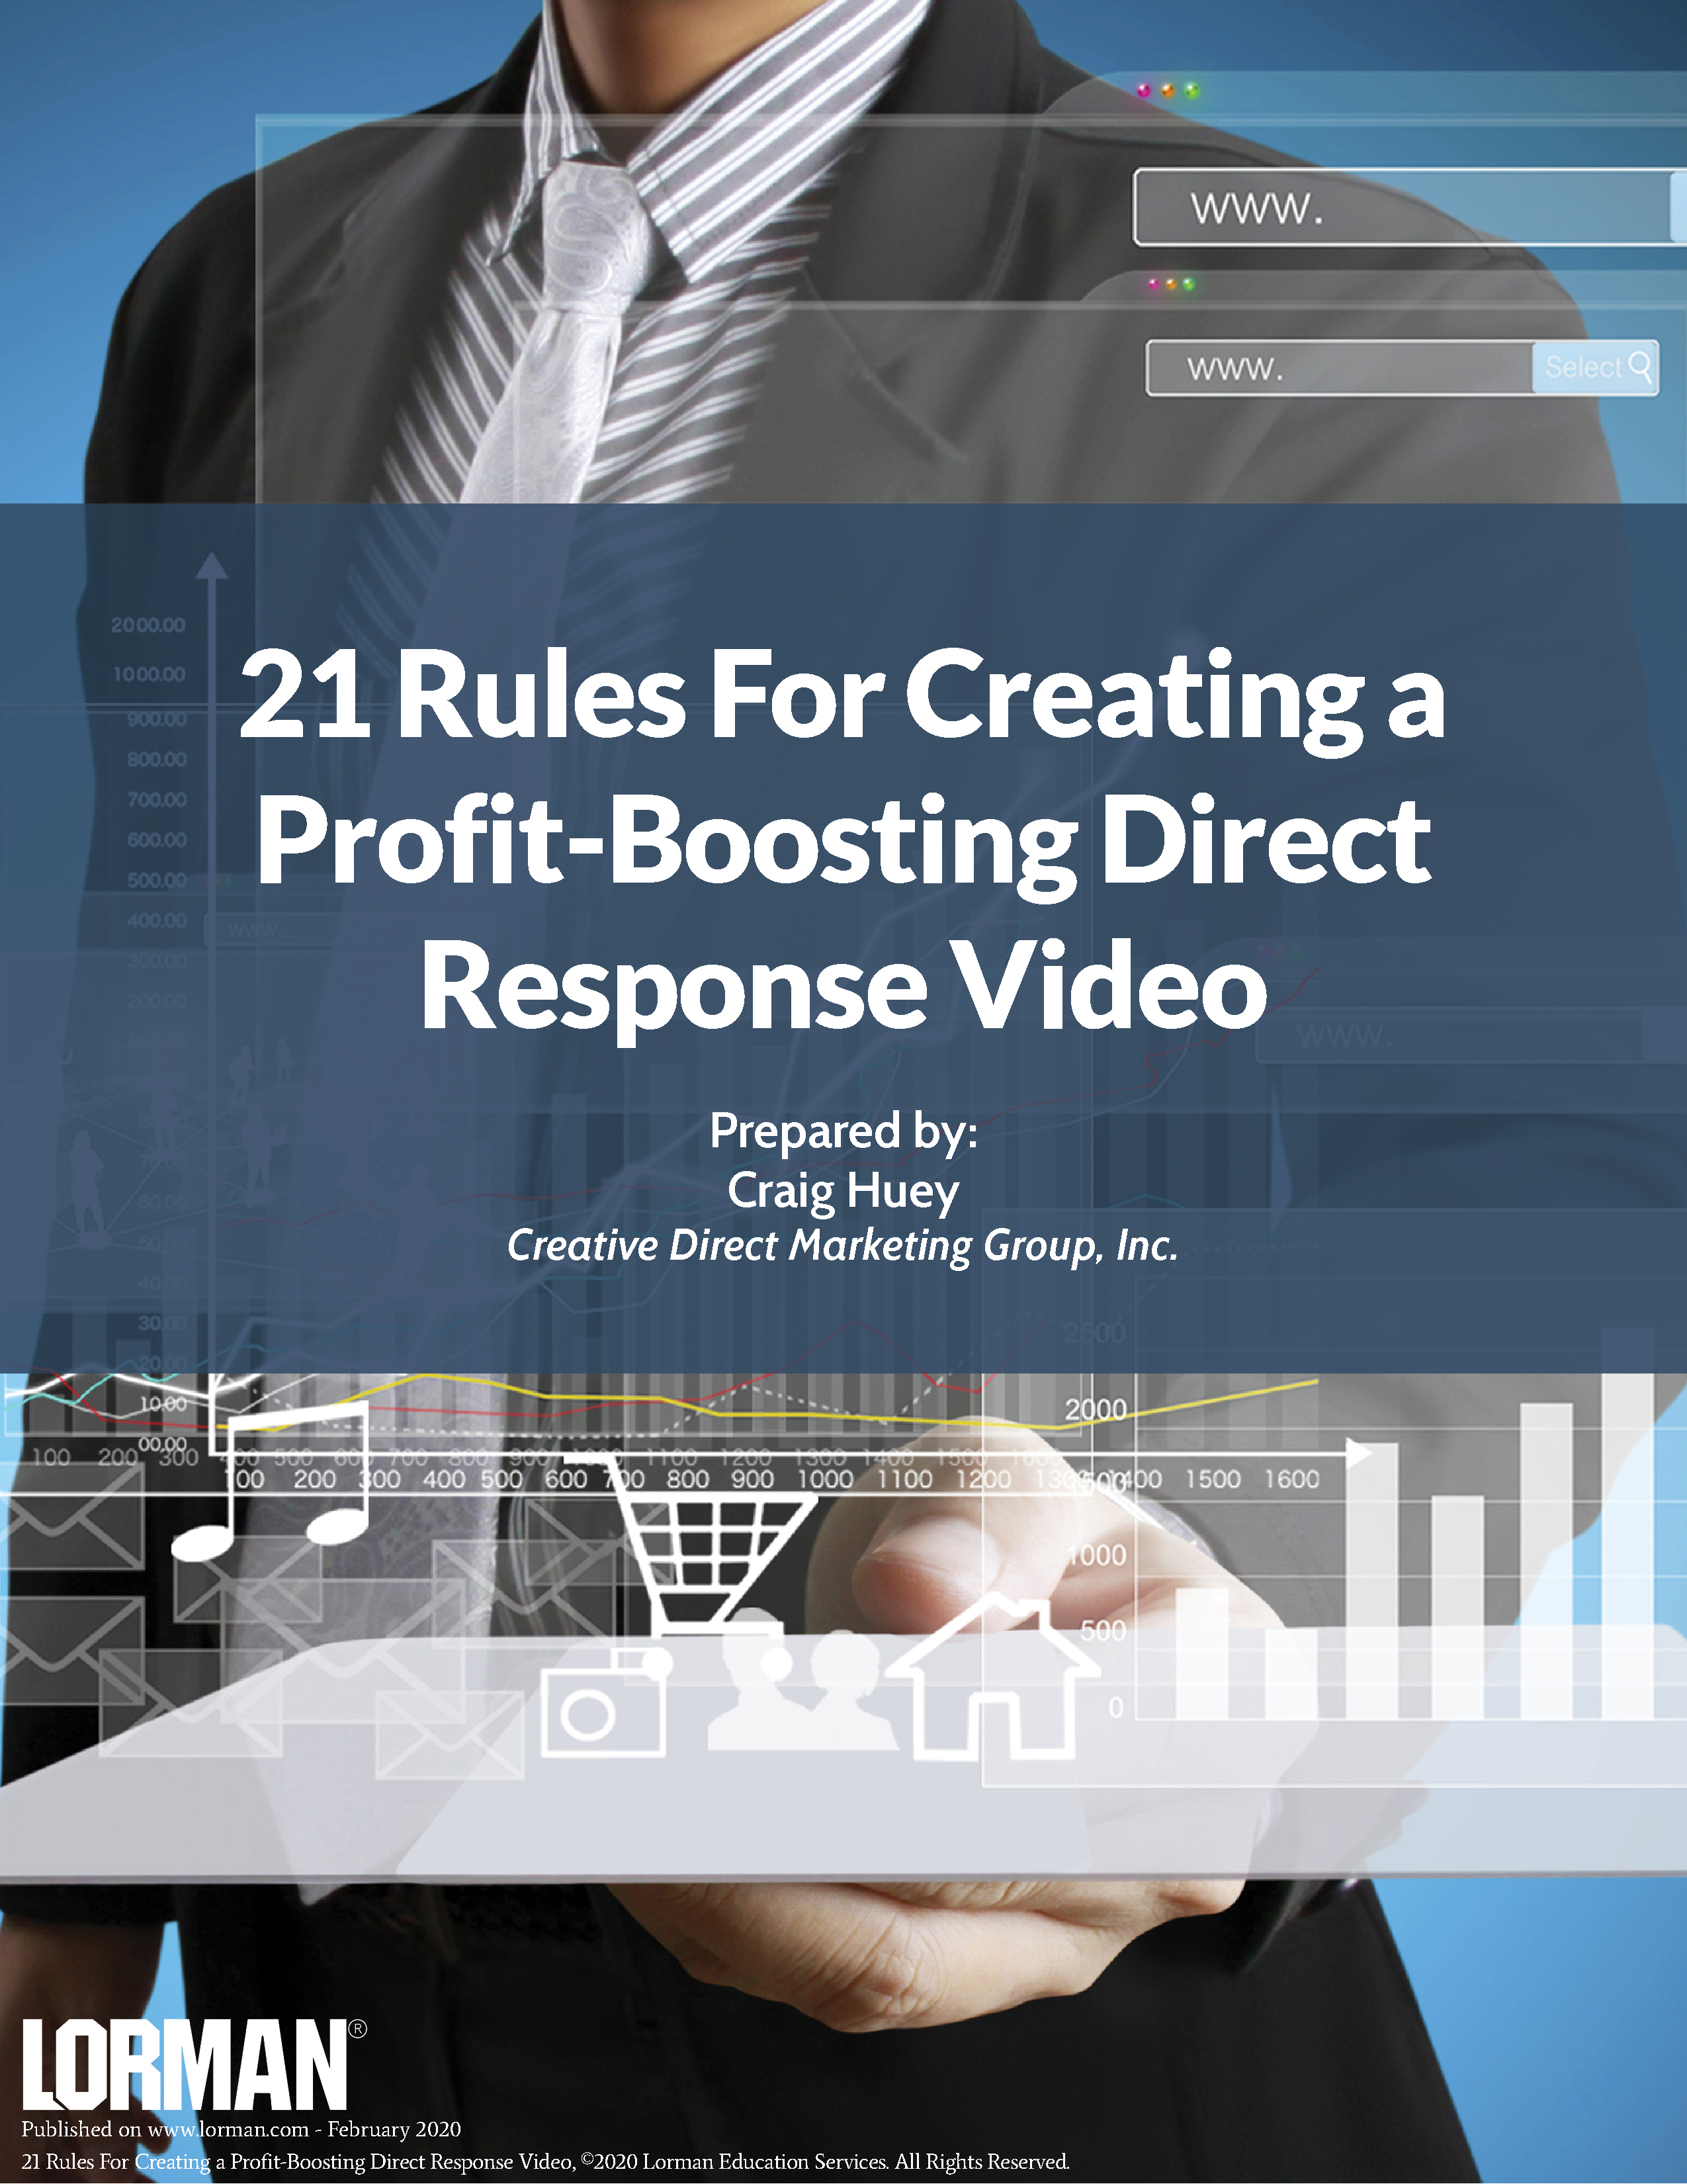 21 Rules For Creating a Profit-Boosting Direct Response Video